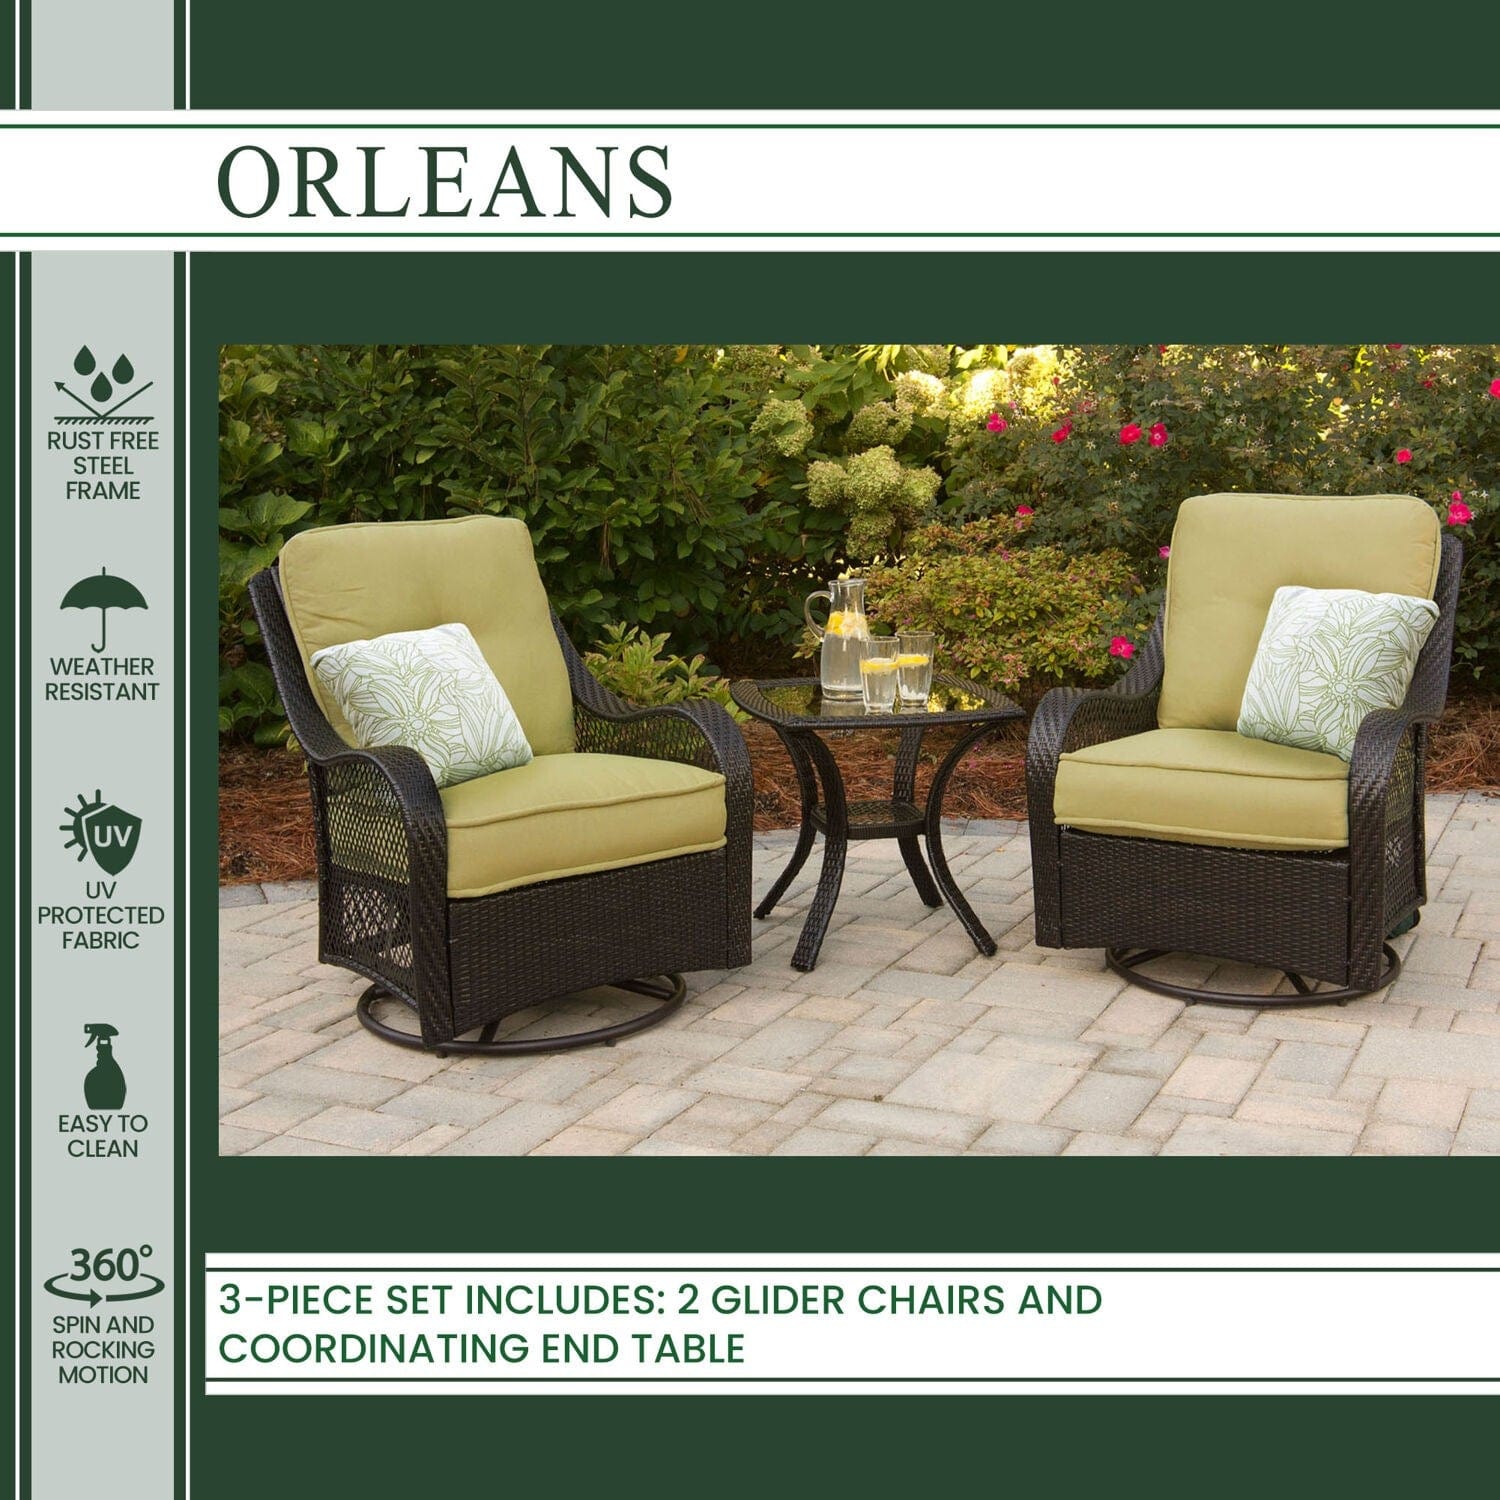 Hanover Conversation Set Hanover - Orleans 3pc Seating Set (2 swivel gliders, 1 end table)